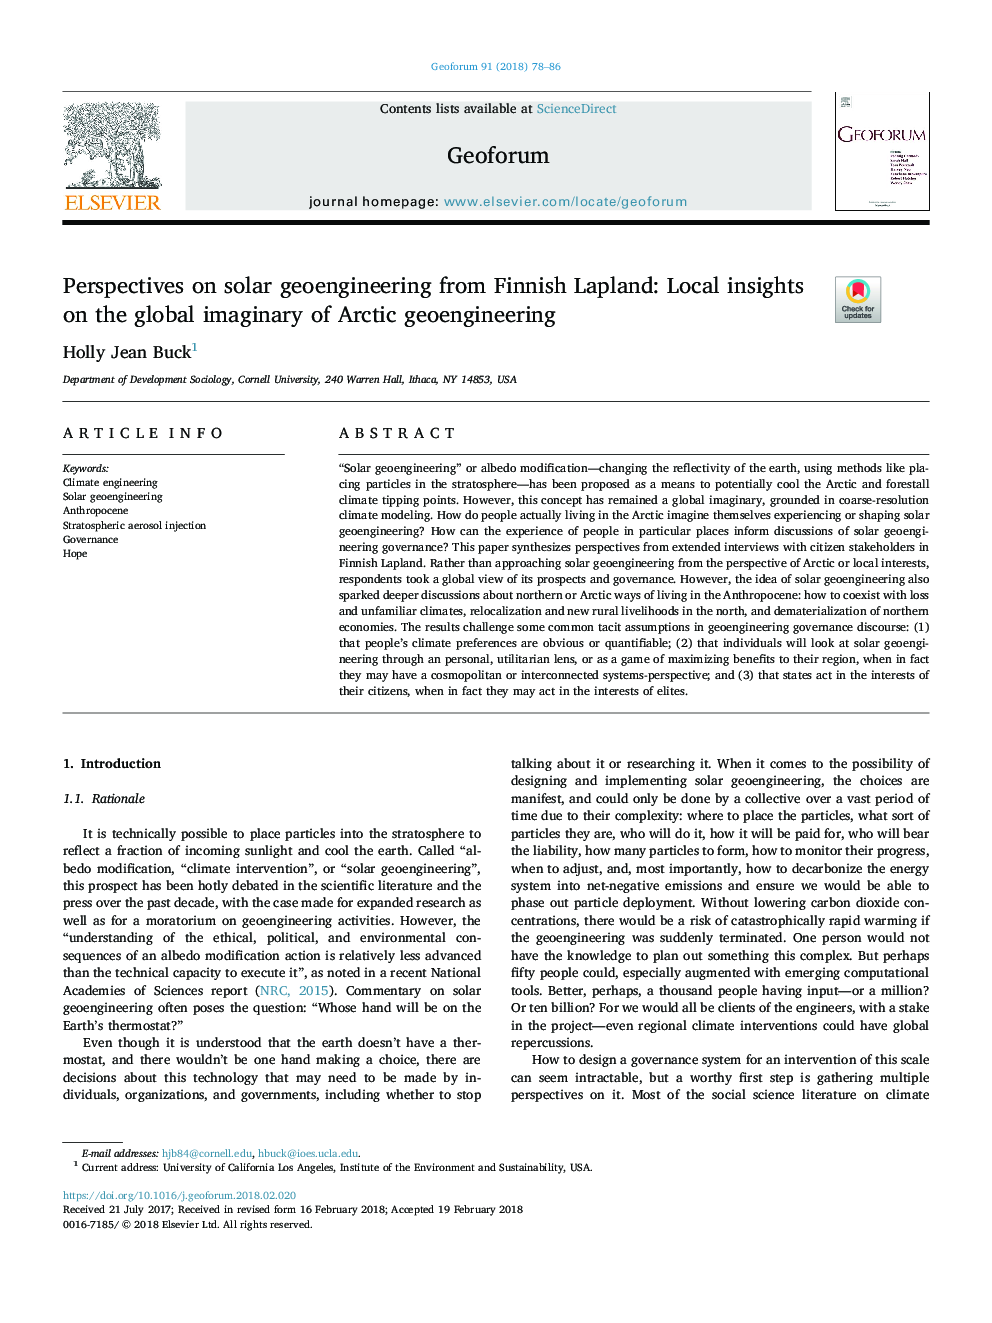 Perspectives on solar geoengineering from Finnish Lapland: Local insights on the global imaginary of Arctic geoengineering